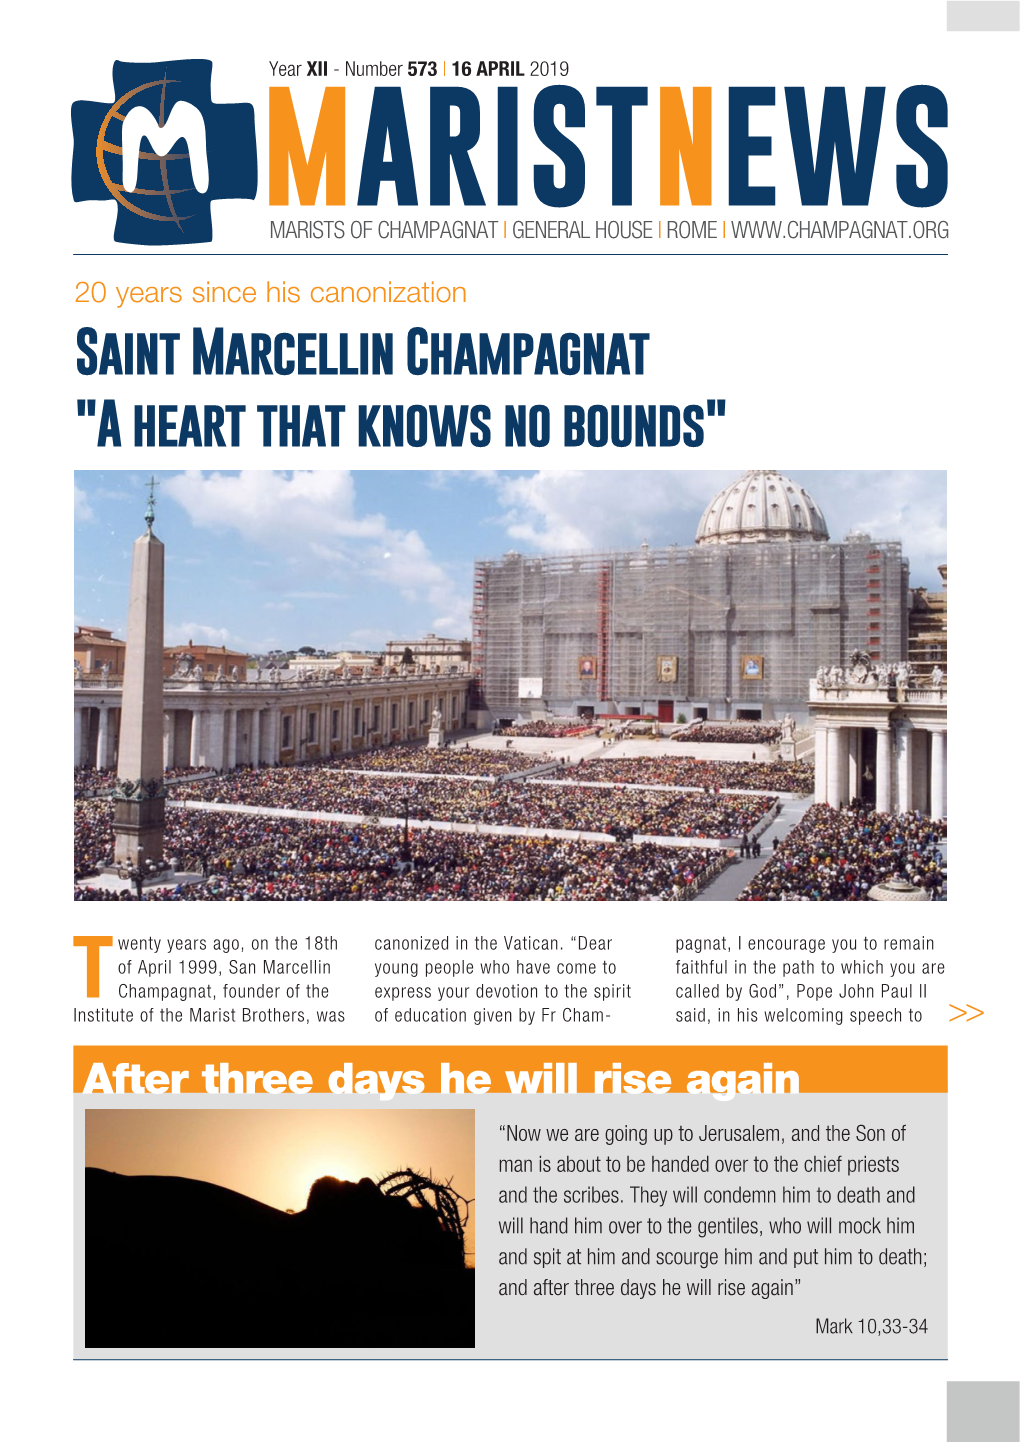 Saint Marcellin Champagnat "A Heart That Knows No Bounds"